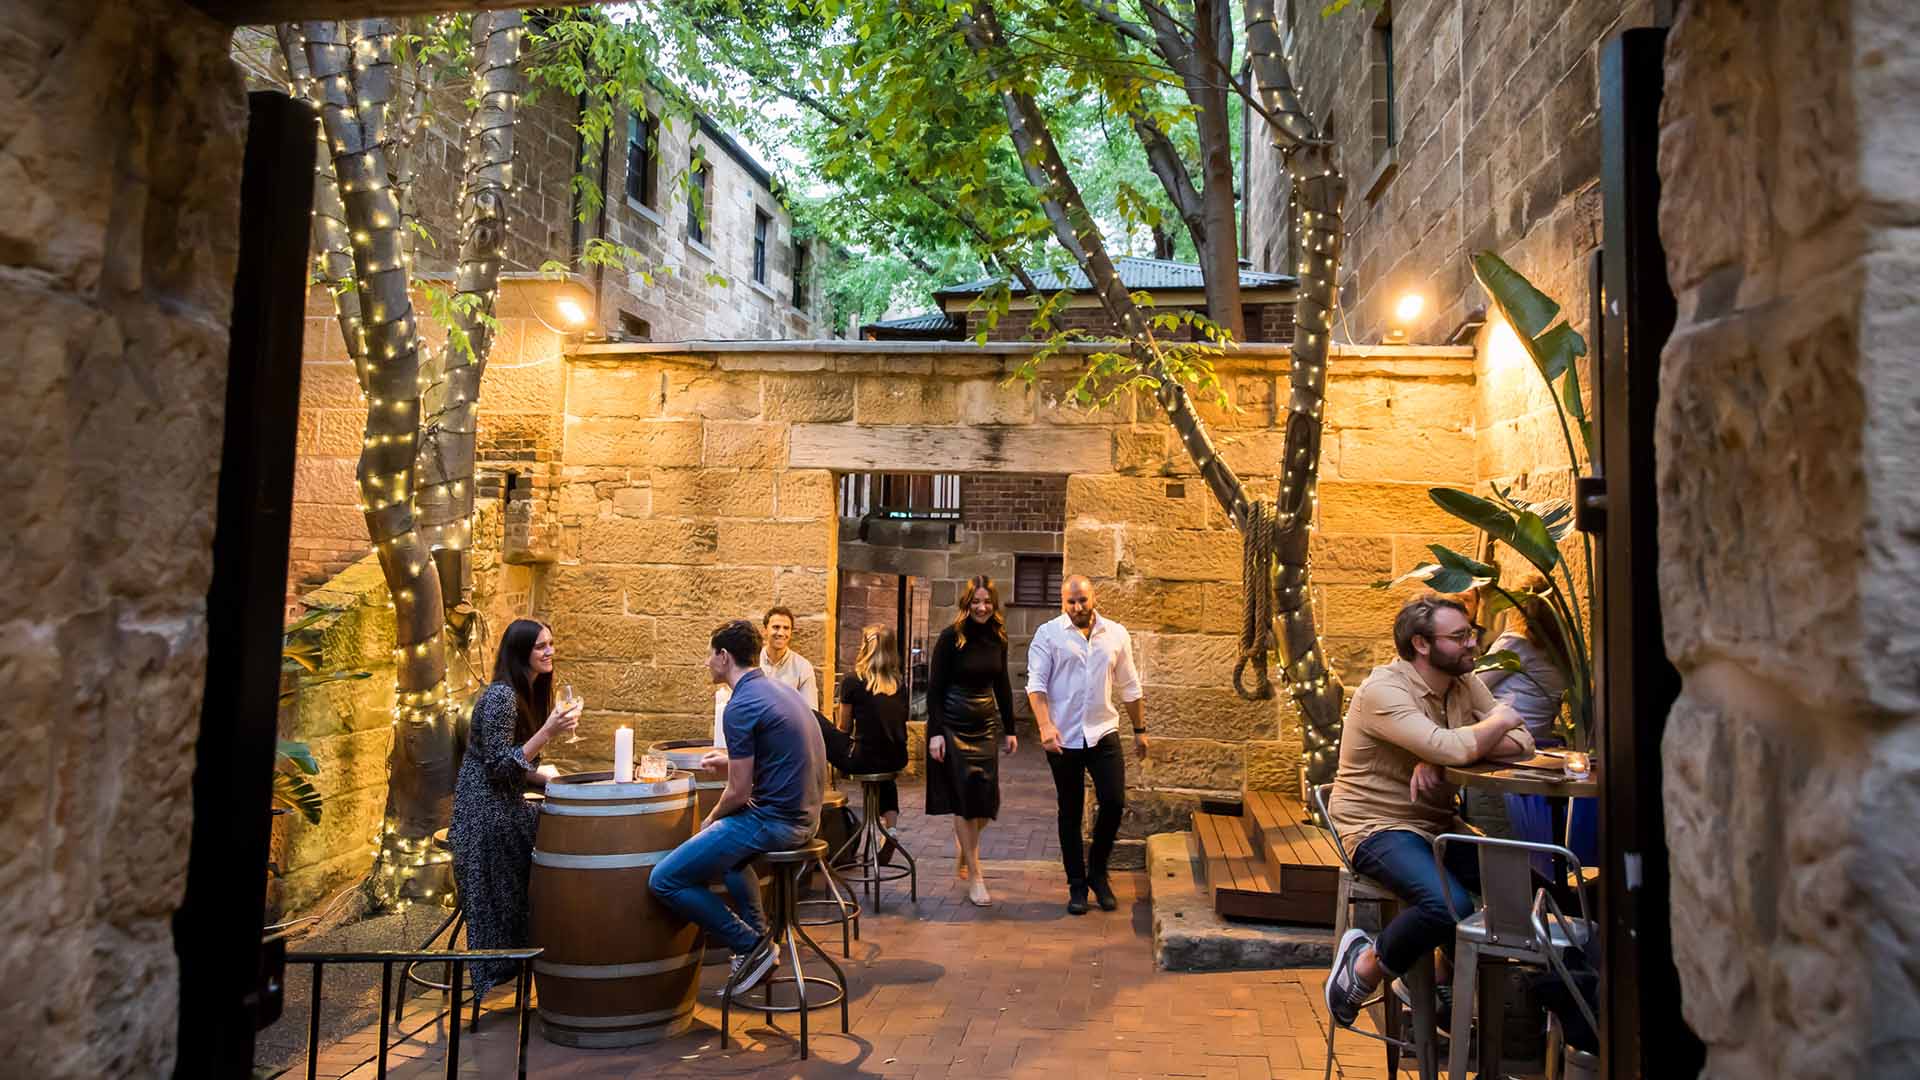 Sydney's Laneways, Streets and Car Parks Are Being Transformed Into Al Fresco Dining Areas